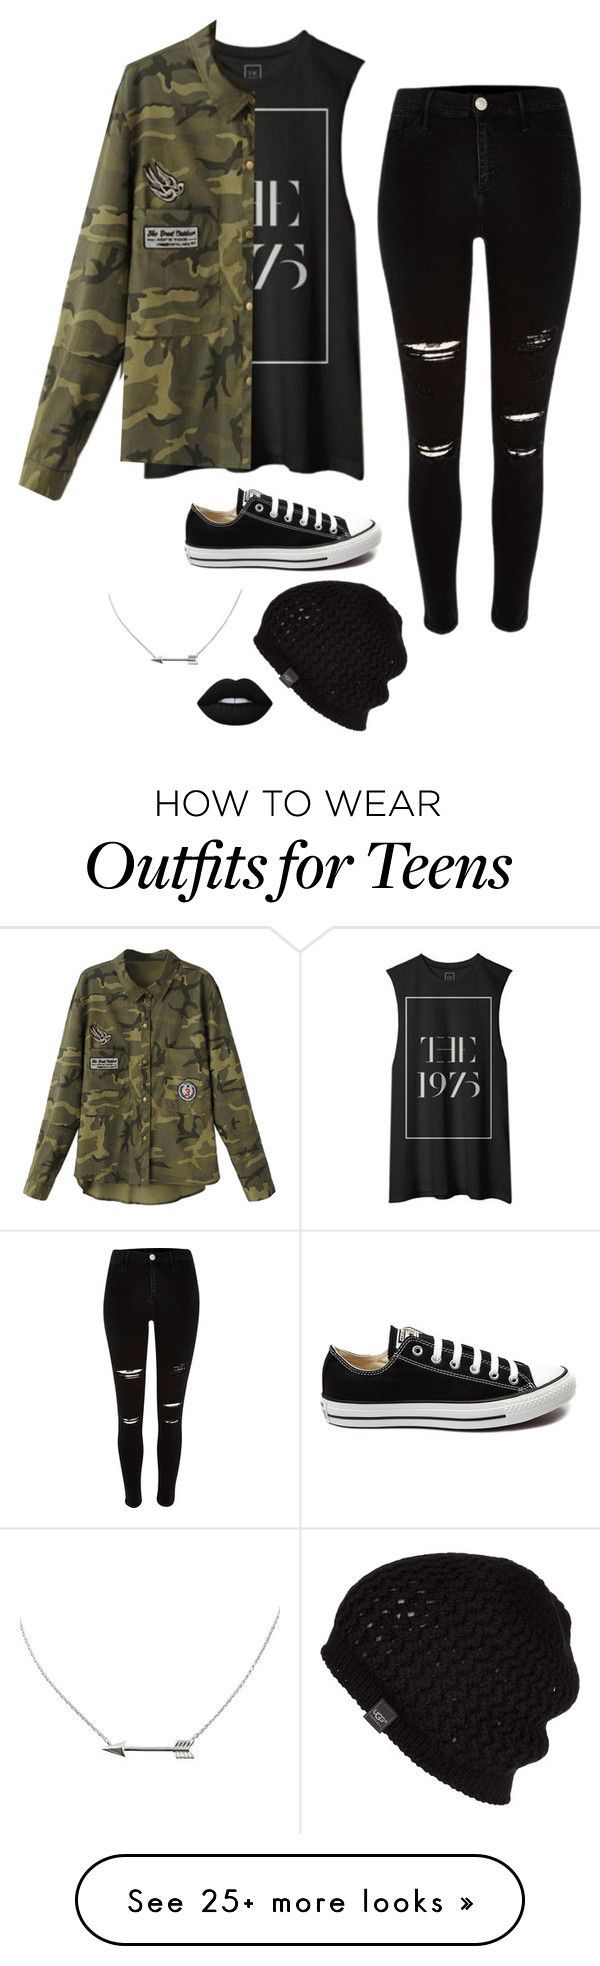 “Untitled #2762” by if-i-were-famous1 on Polyvore featuring Converse, UGG Australia, Lime Crime, women’s clothing, women, female,